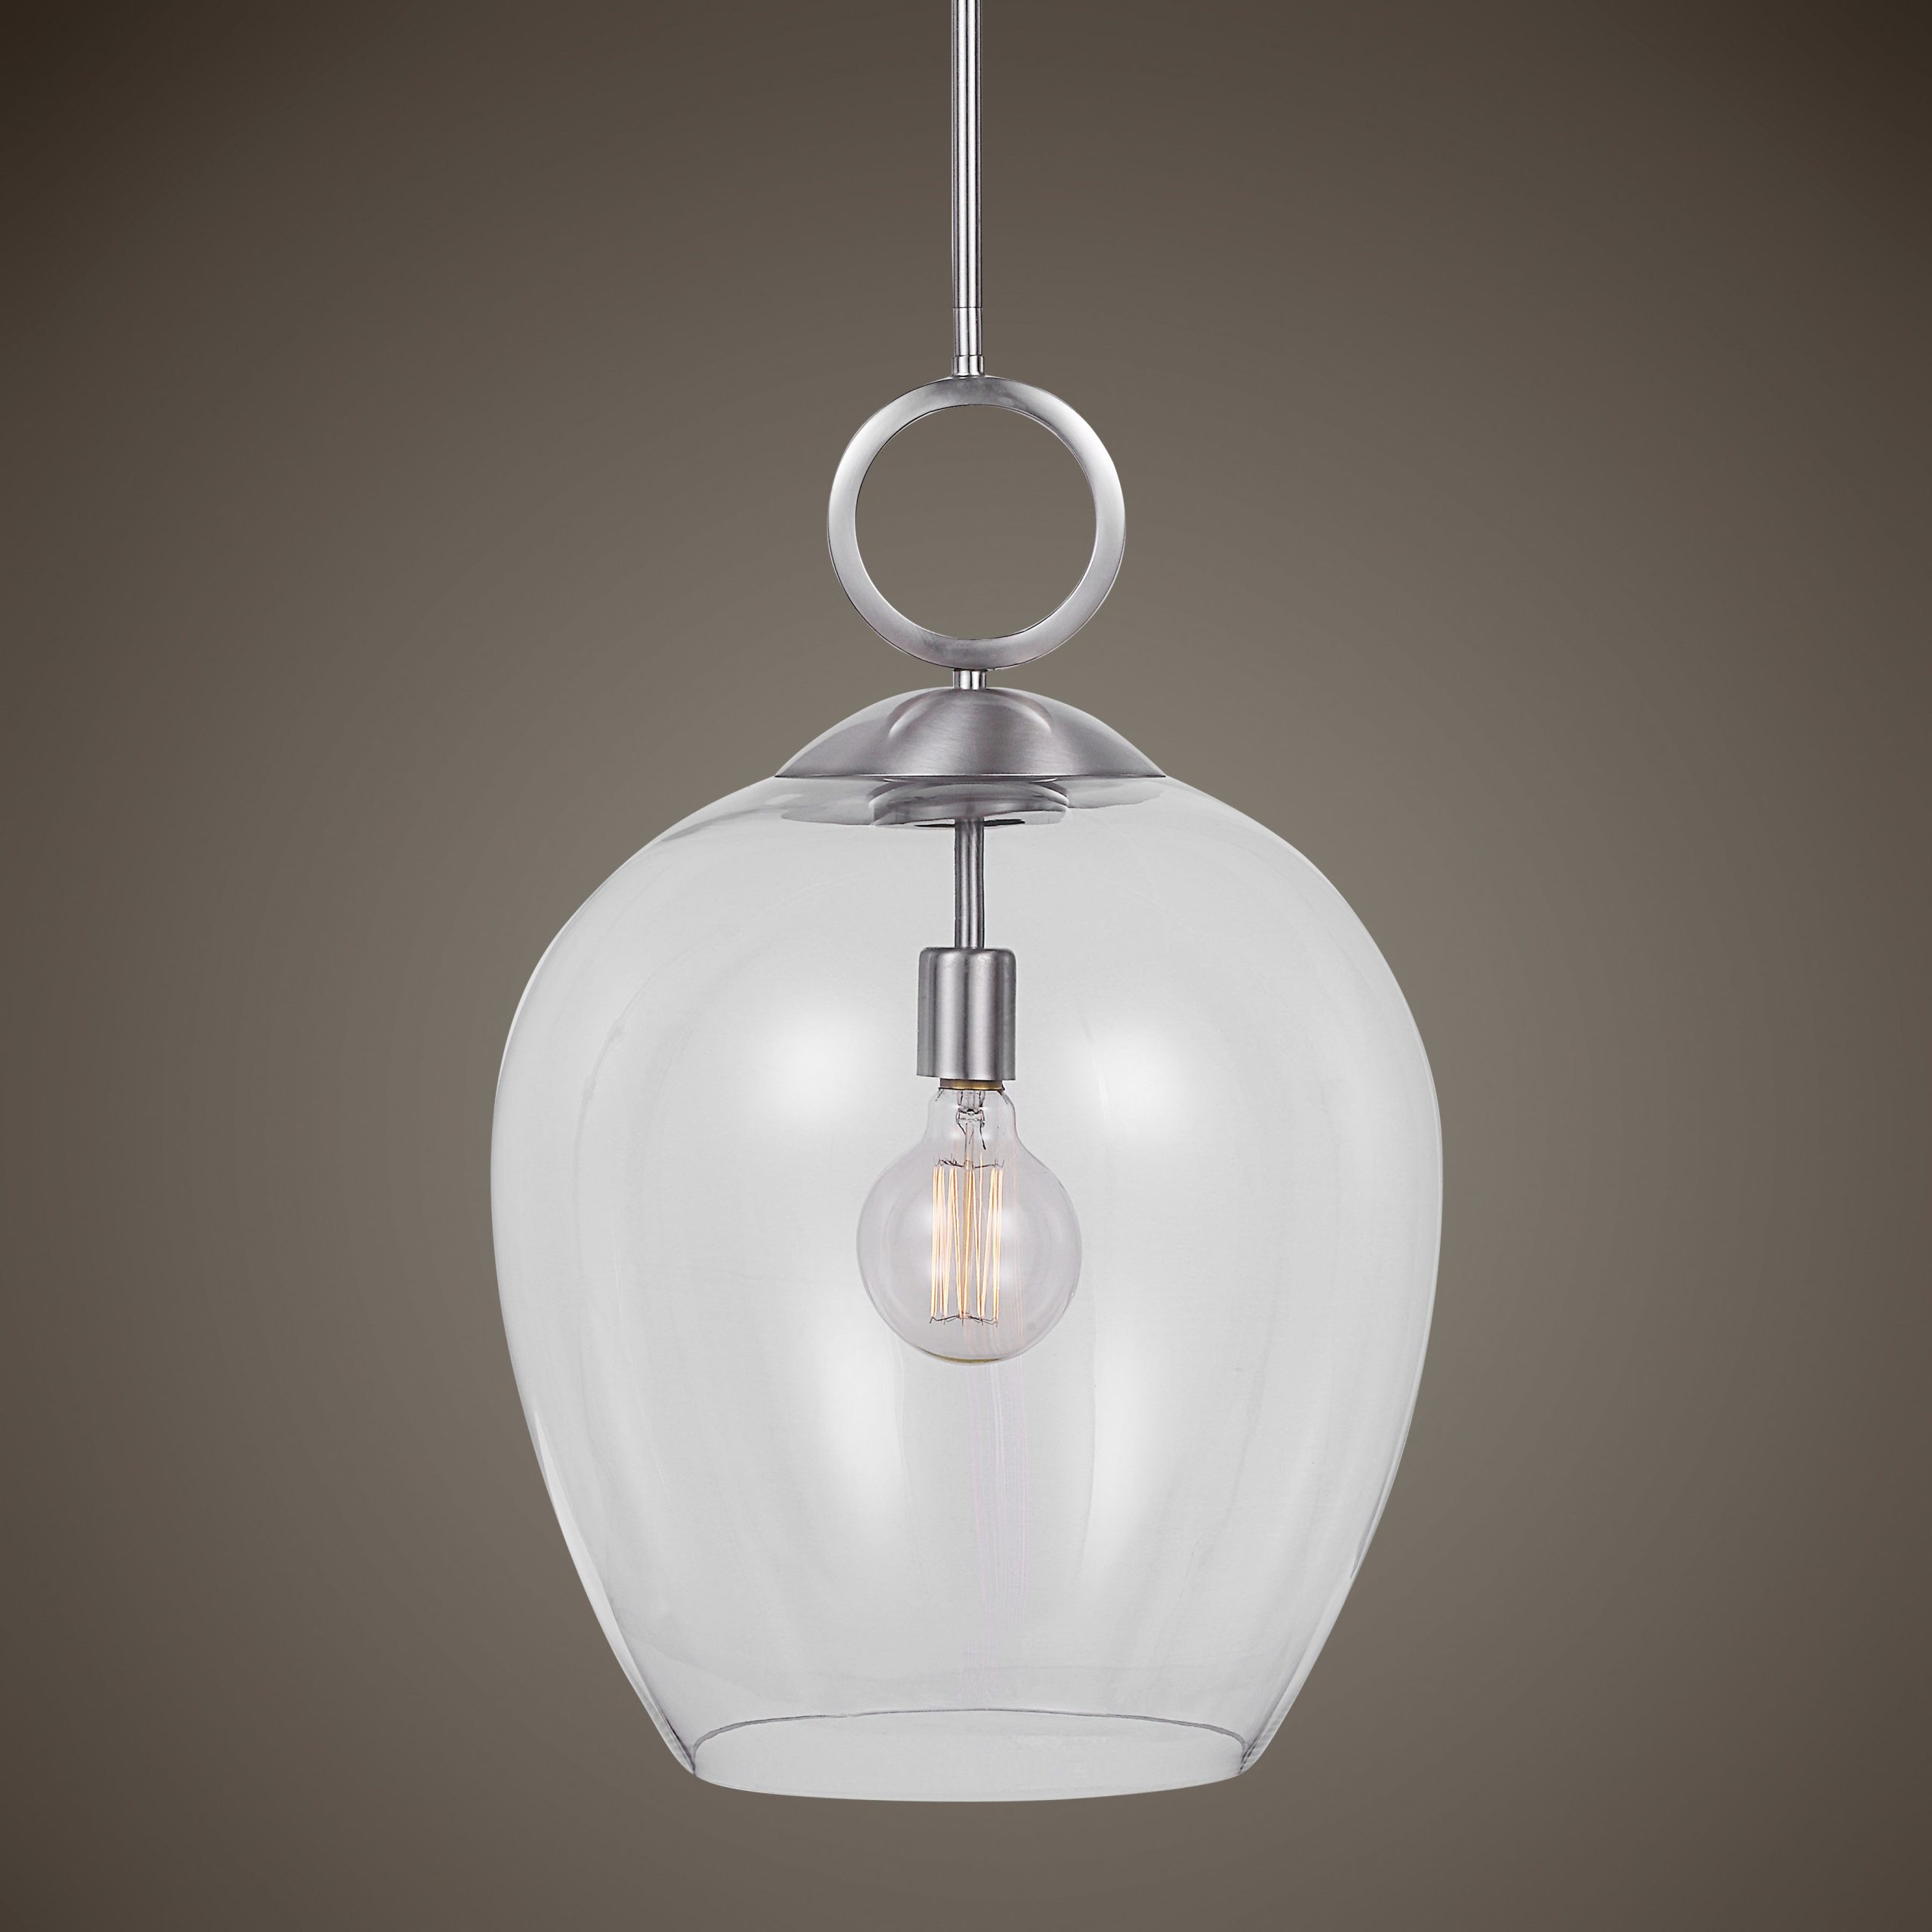 the-official-site-of-official-uttermost-22169-calix-nickel-1-light-glass-pendant-on-sale_1.jpg